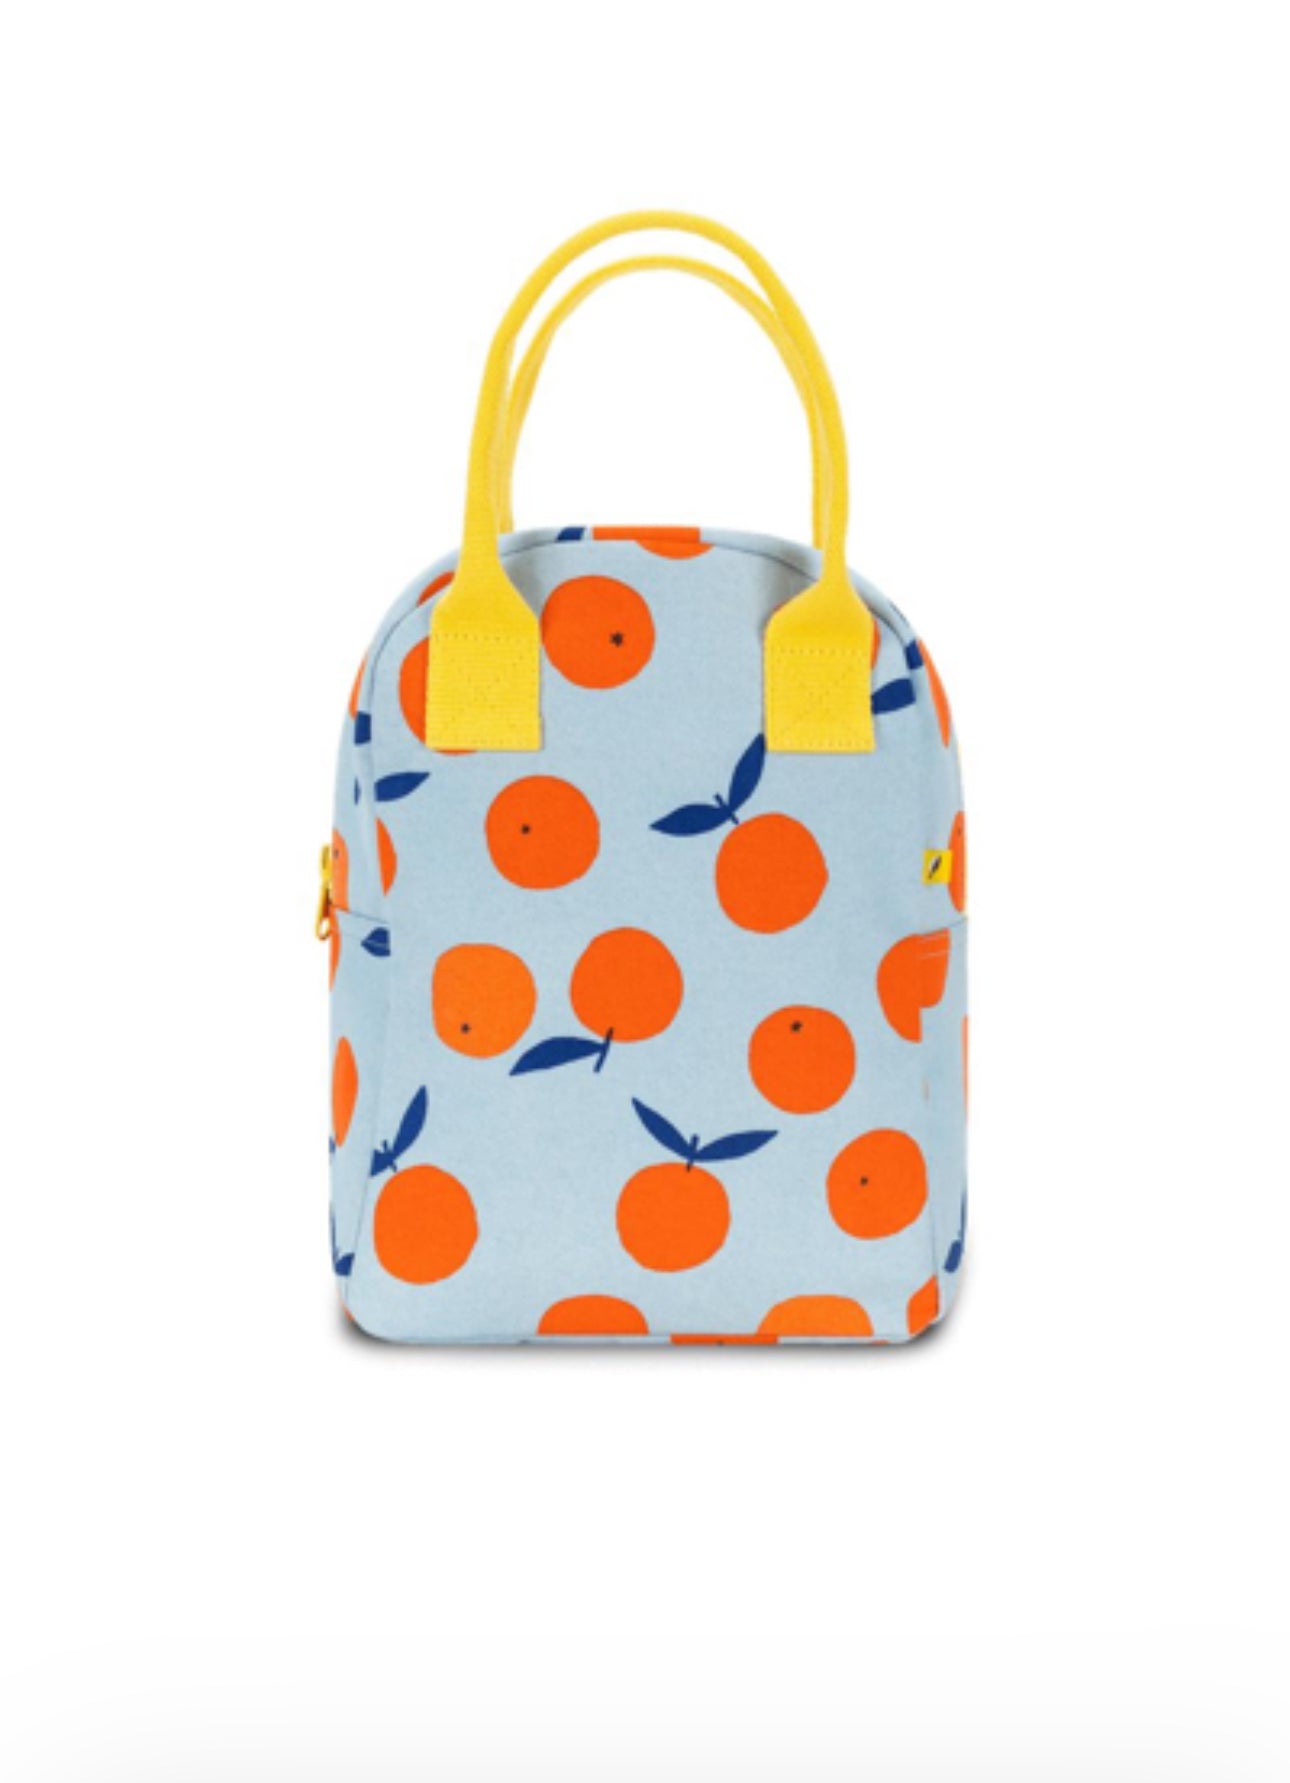 Zipper Lunch Tote - oh-eco